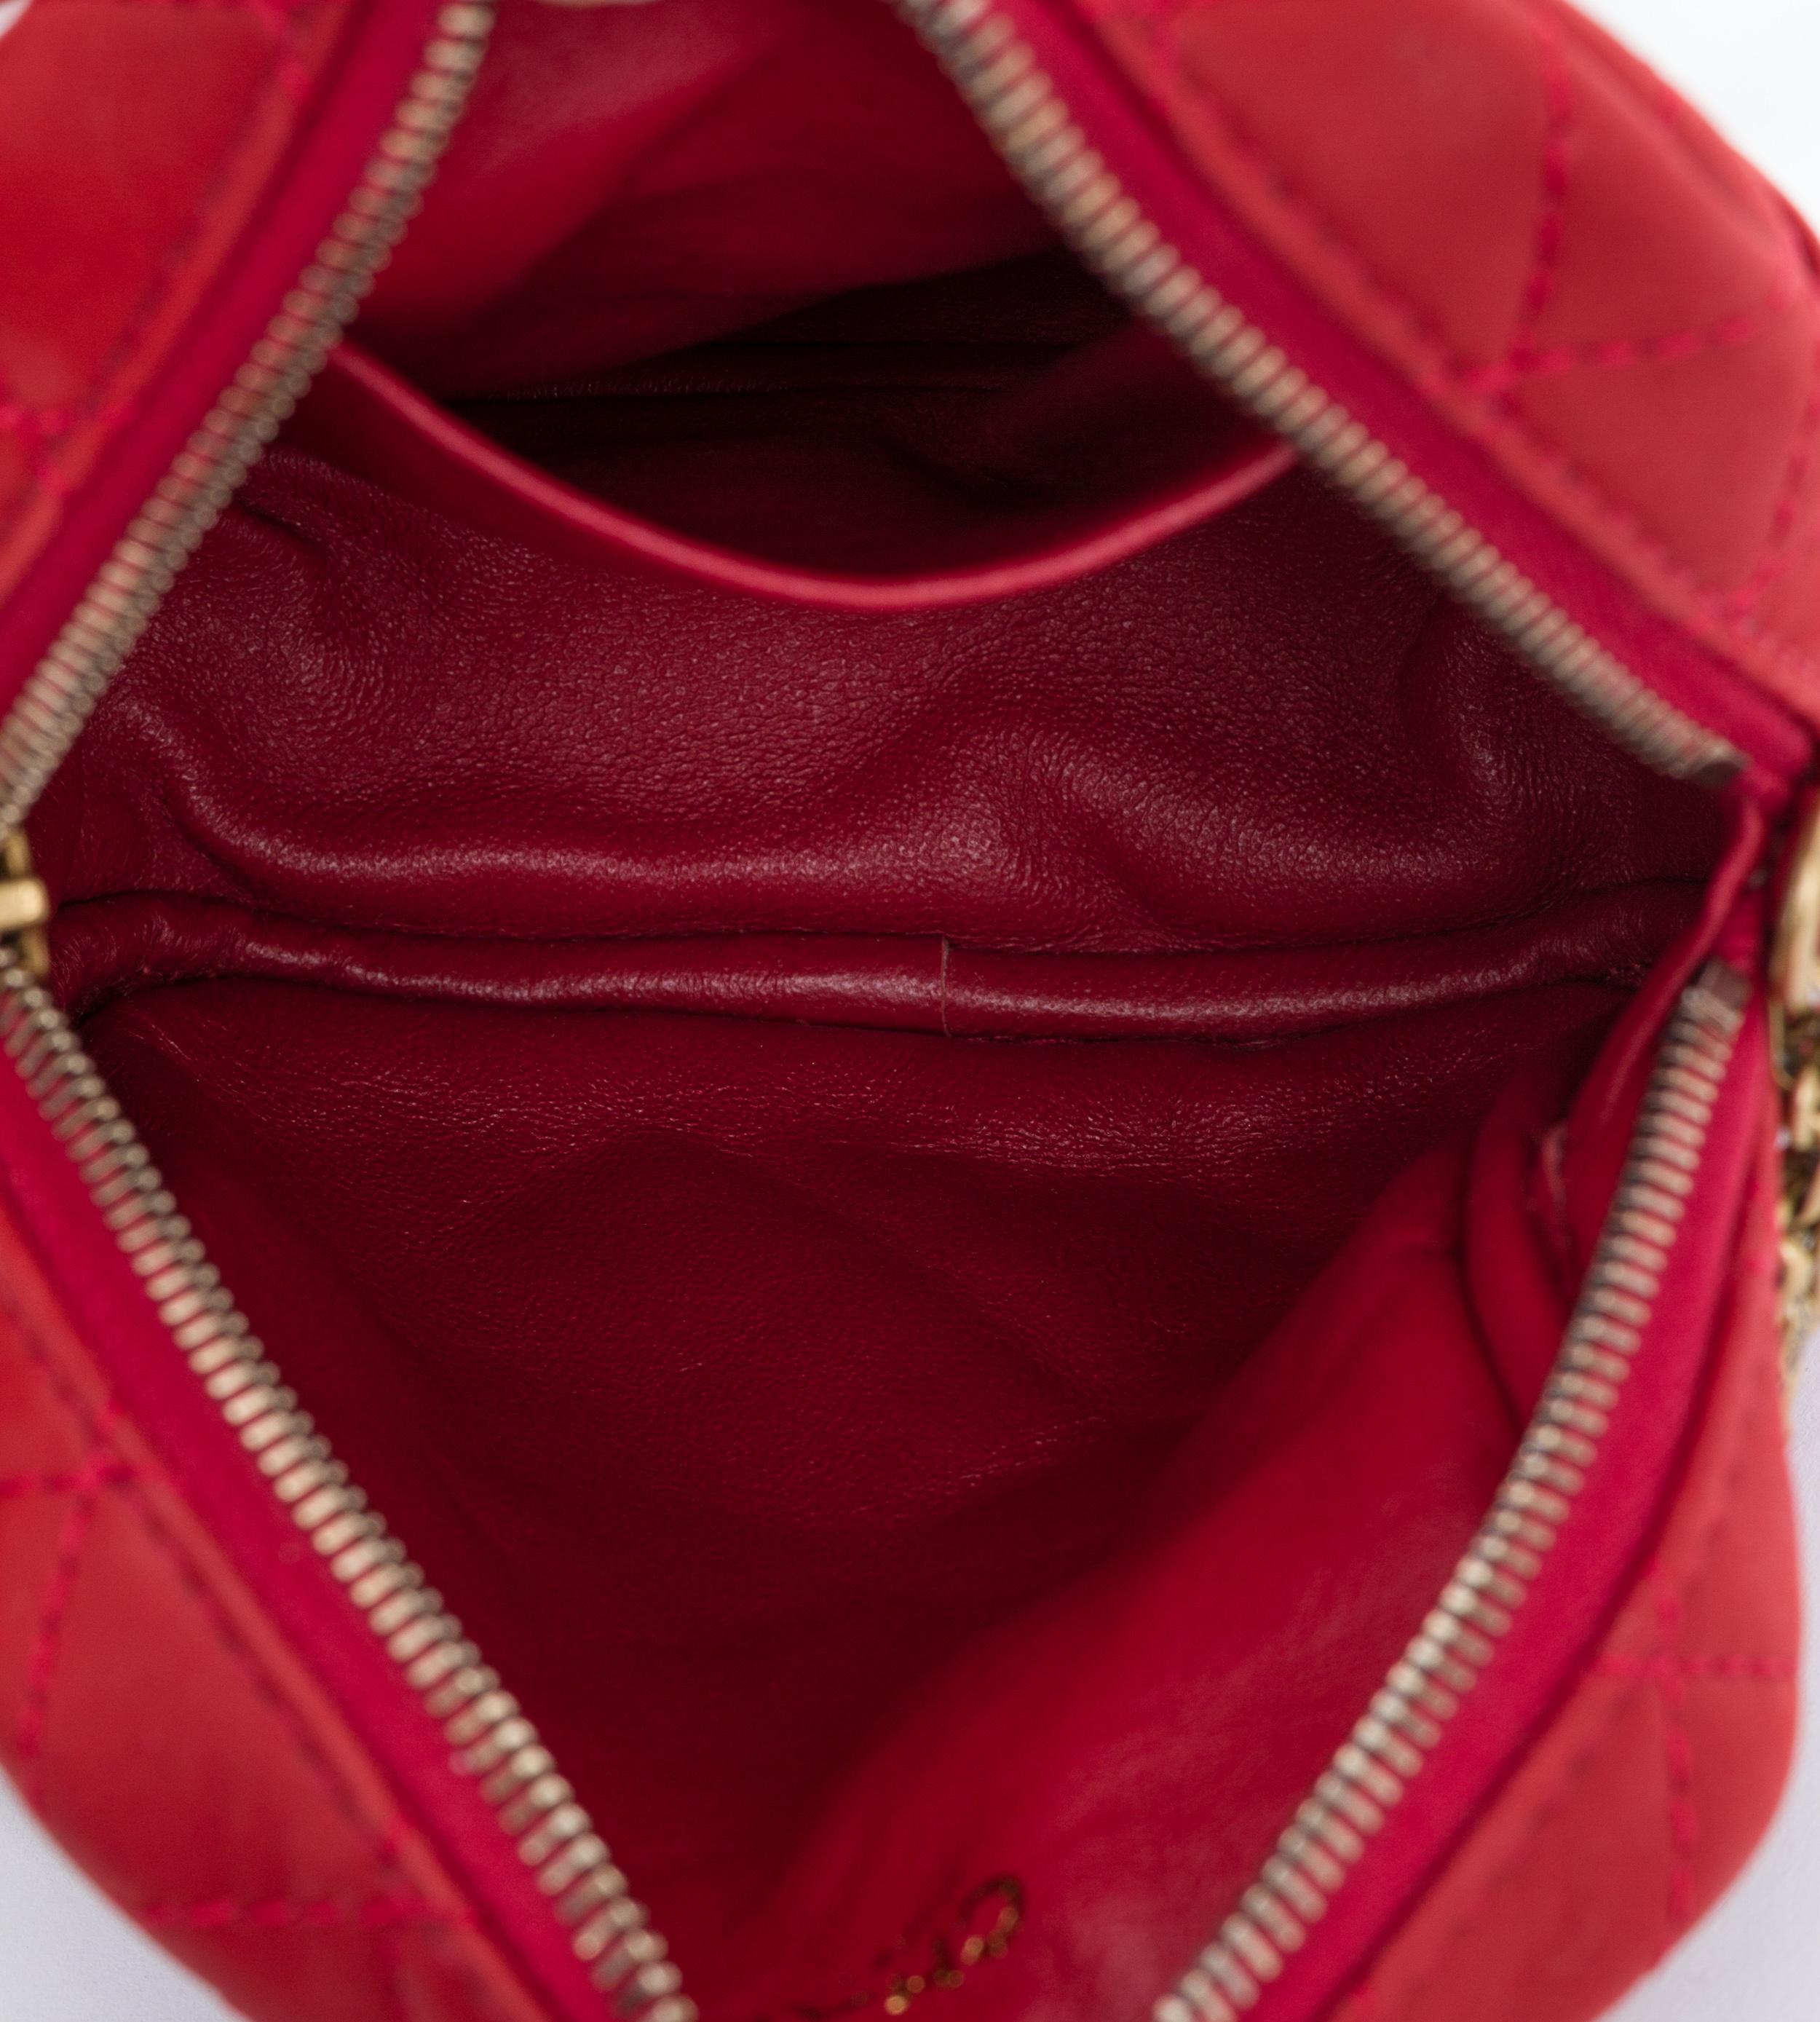 New Chanel Red Quilted Leather Reissue Crossbody Bag 2